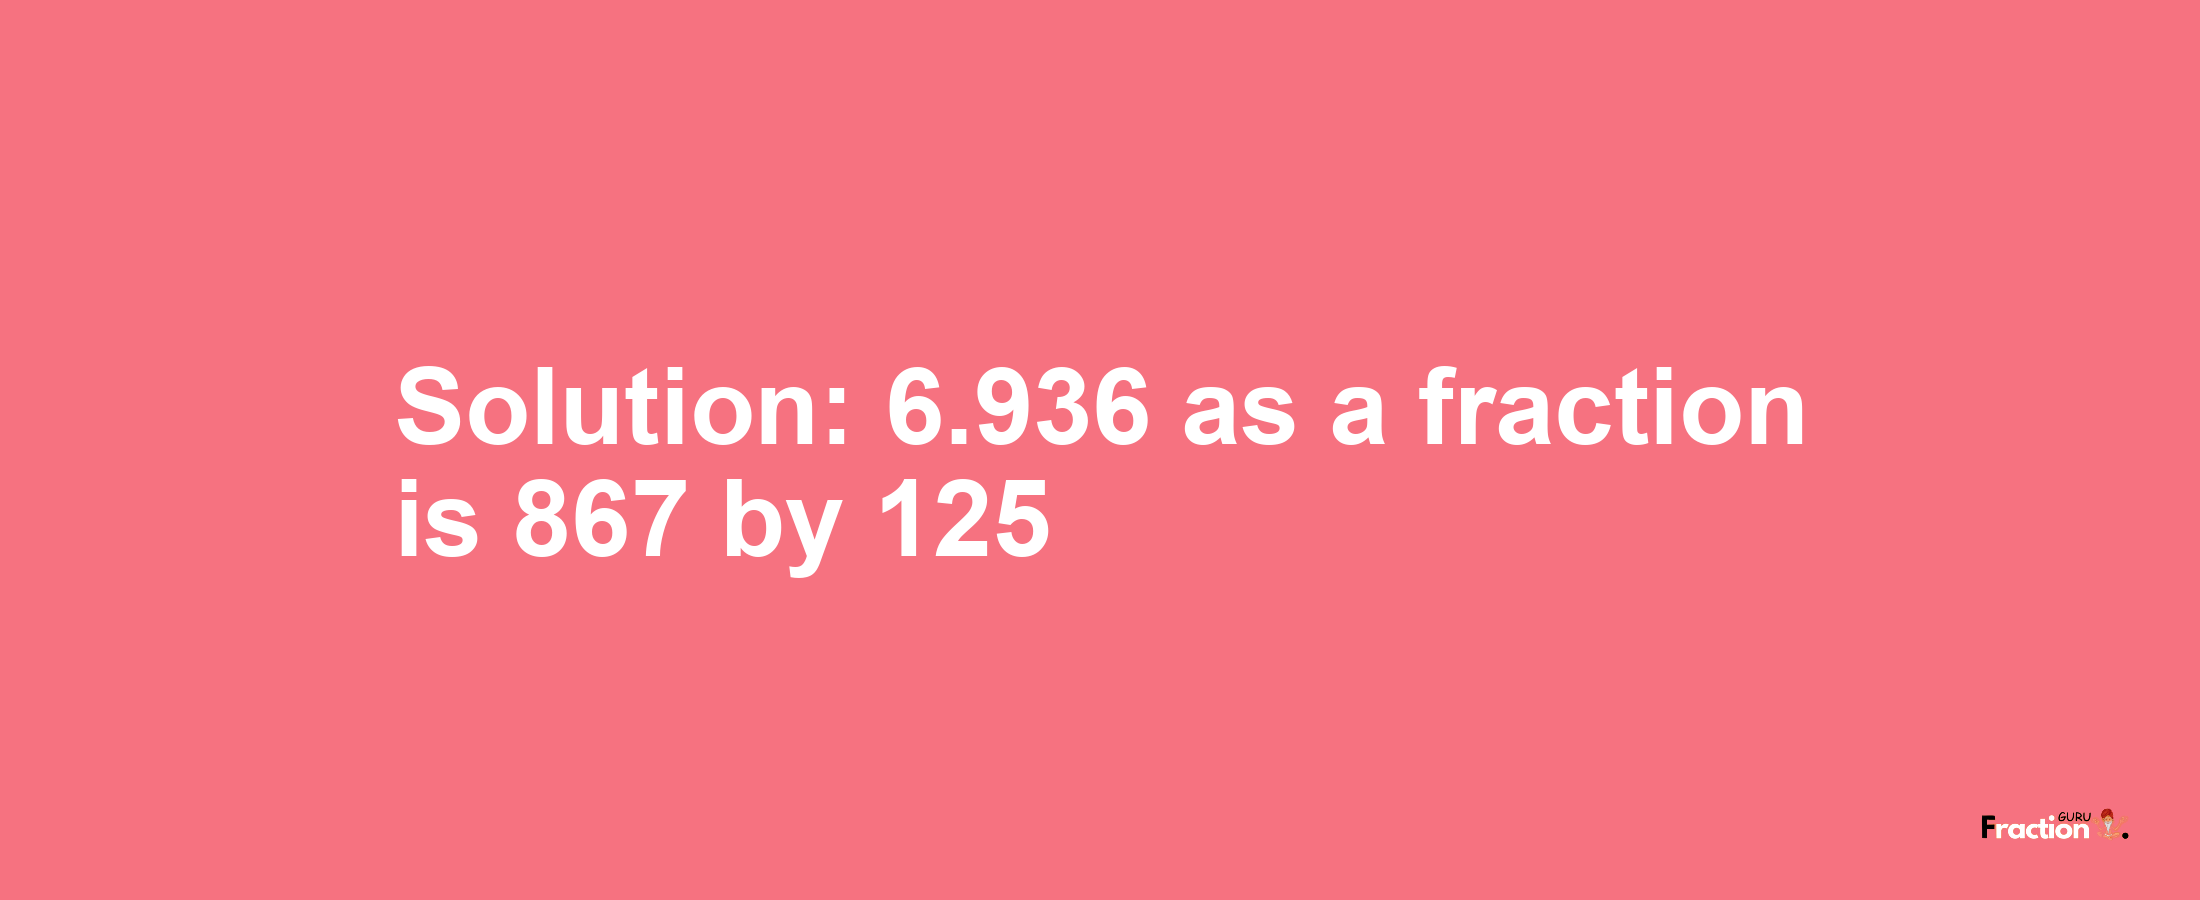 Solution:6.936 as a fraction is 867/125